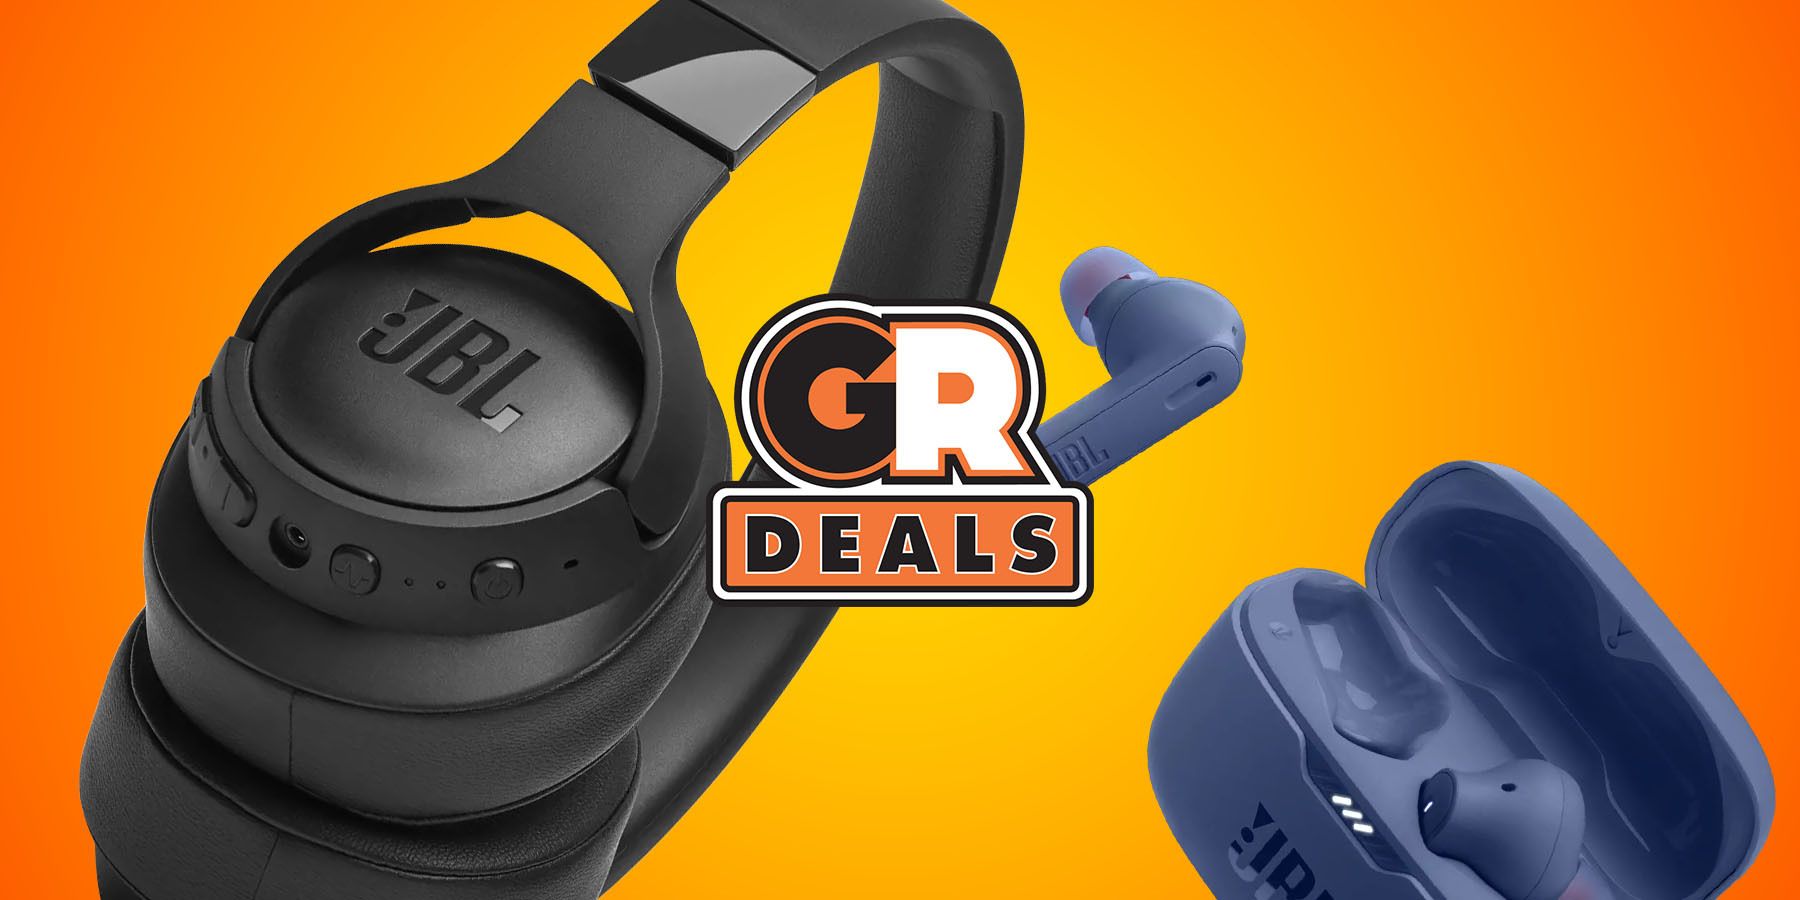 JBL Headphones Are 50% Off Right Now